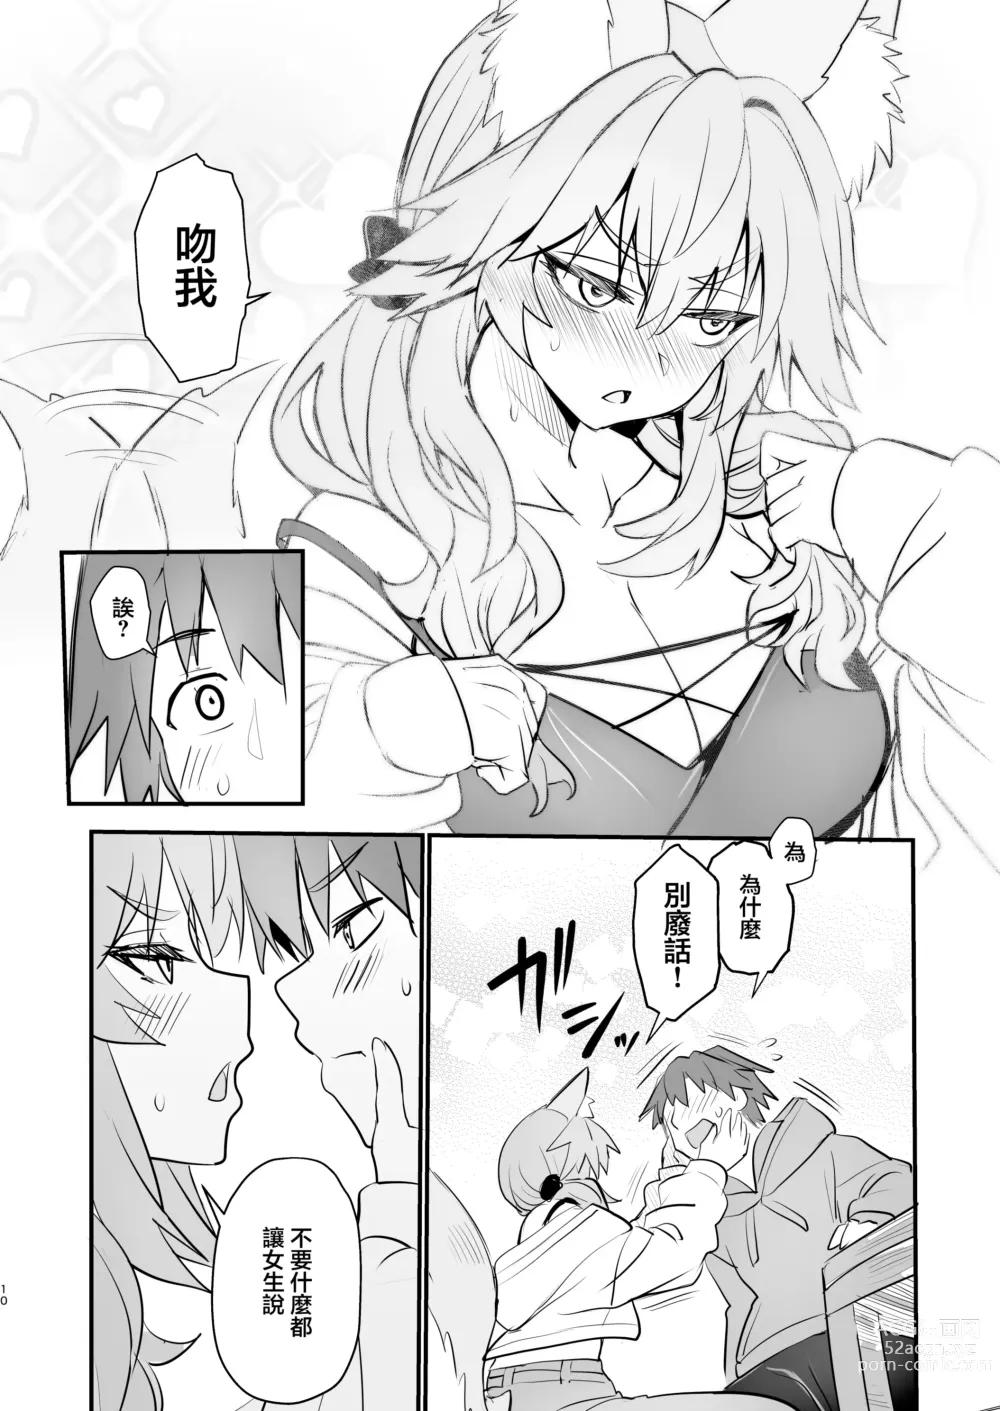 Page 9 of doujinshi 玉藻前大學物語